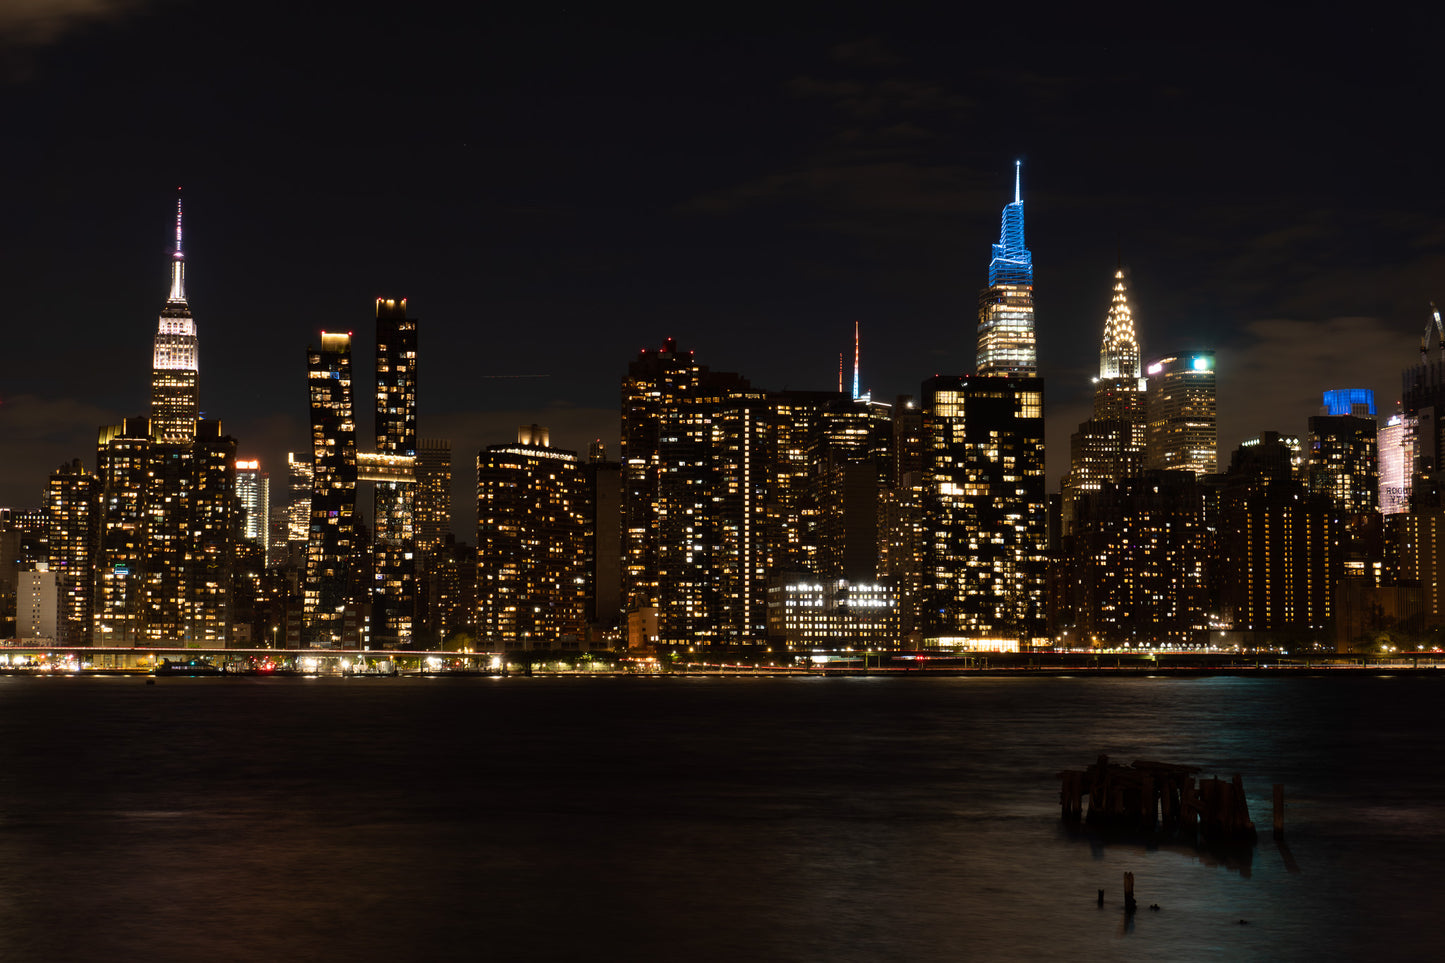 Lightroom Presets Collection 01 "City Nights"